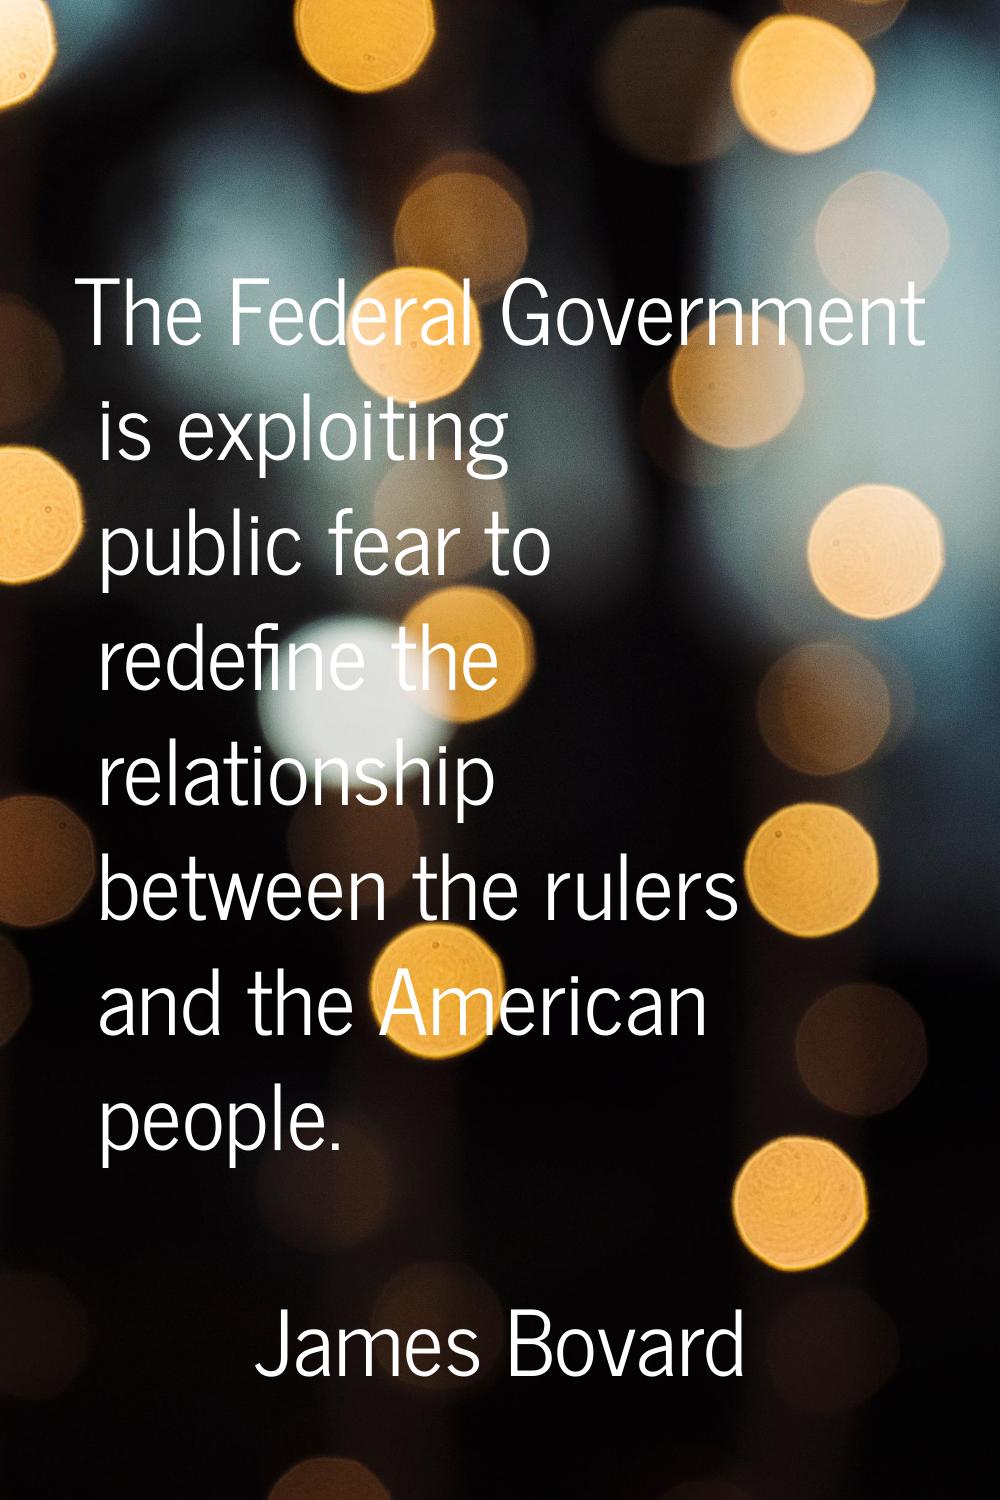 The Federal Government is exploiting public fear to redefine the relationship between the rulers an